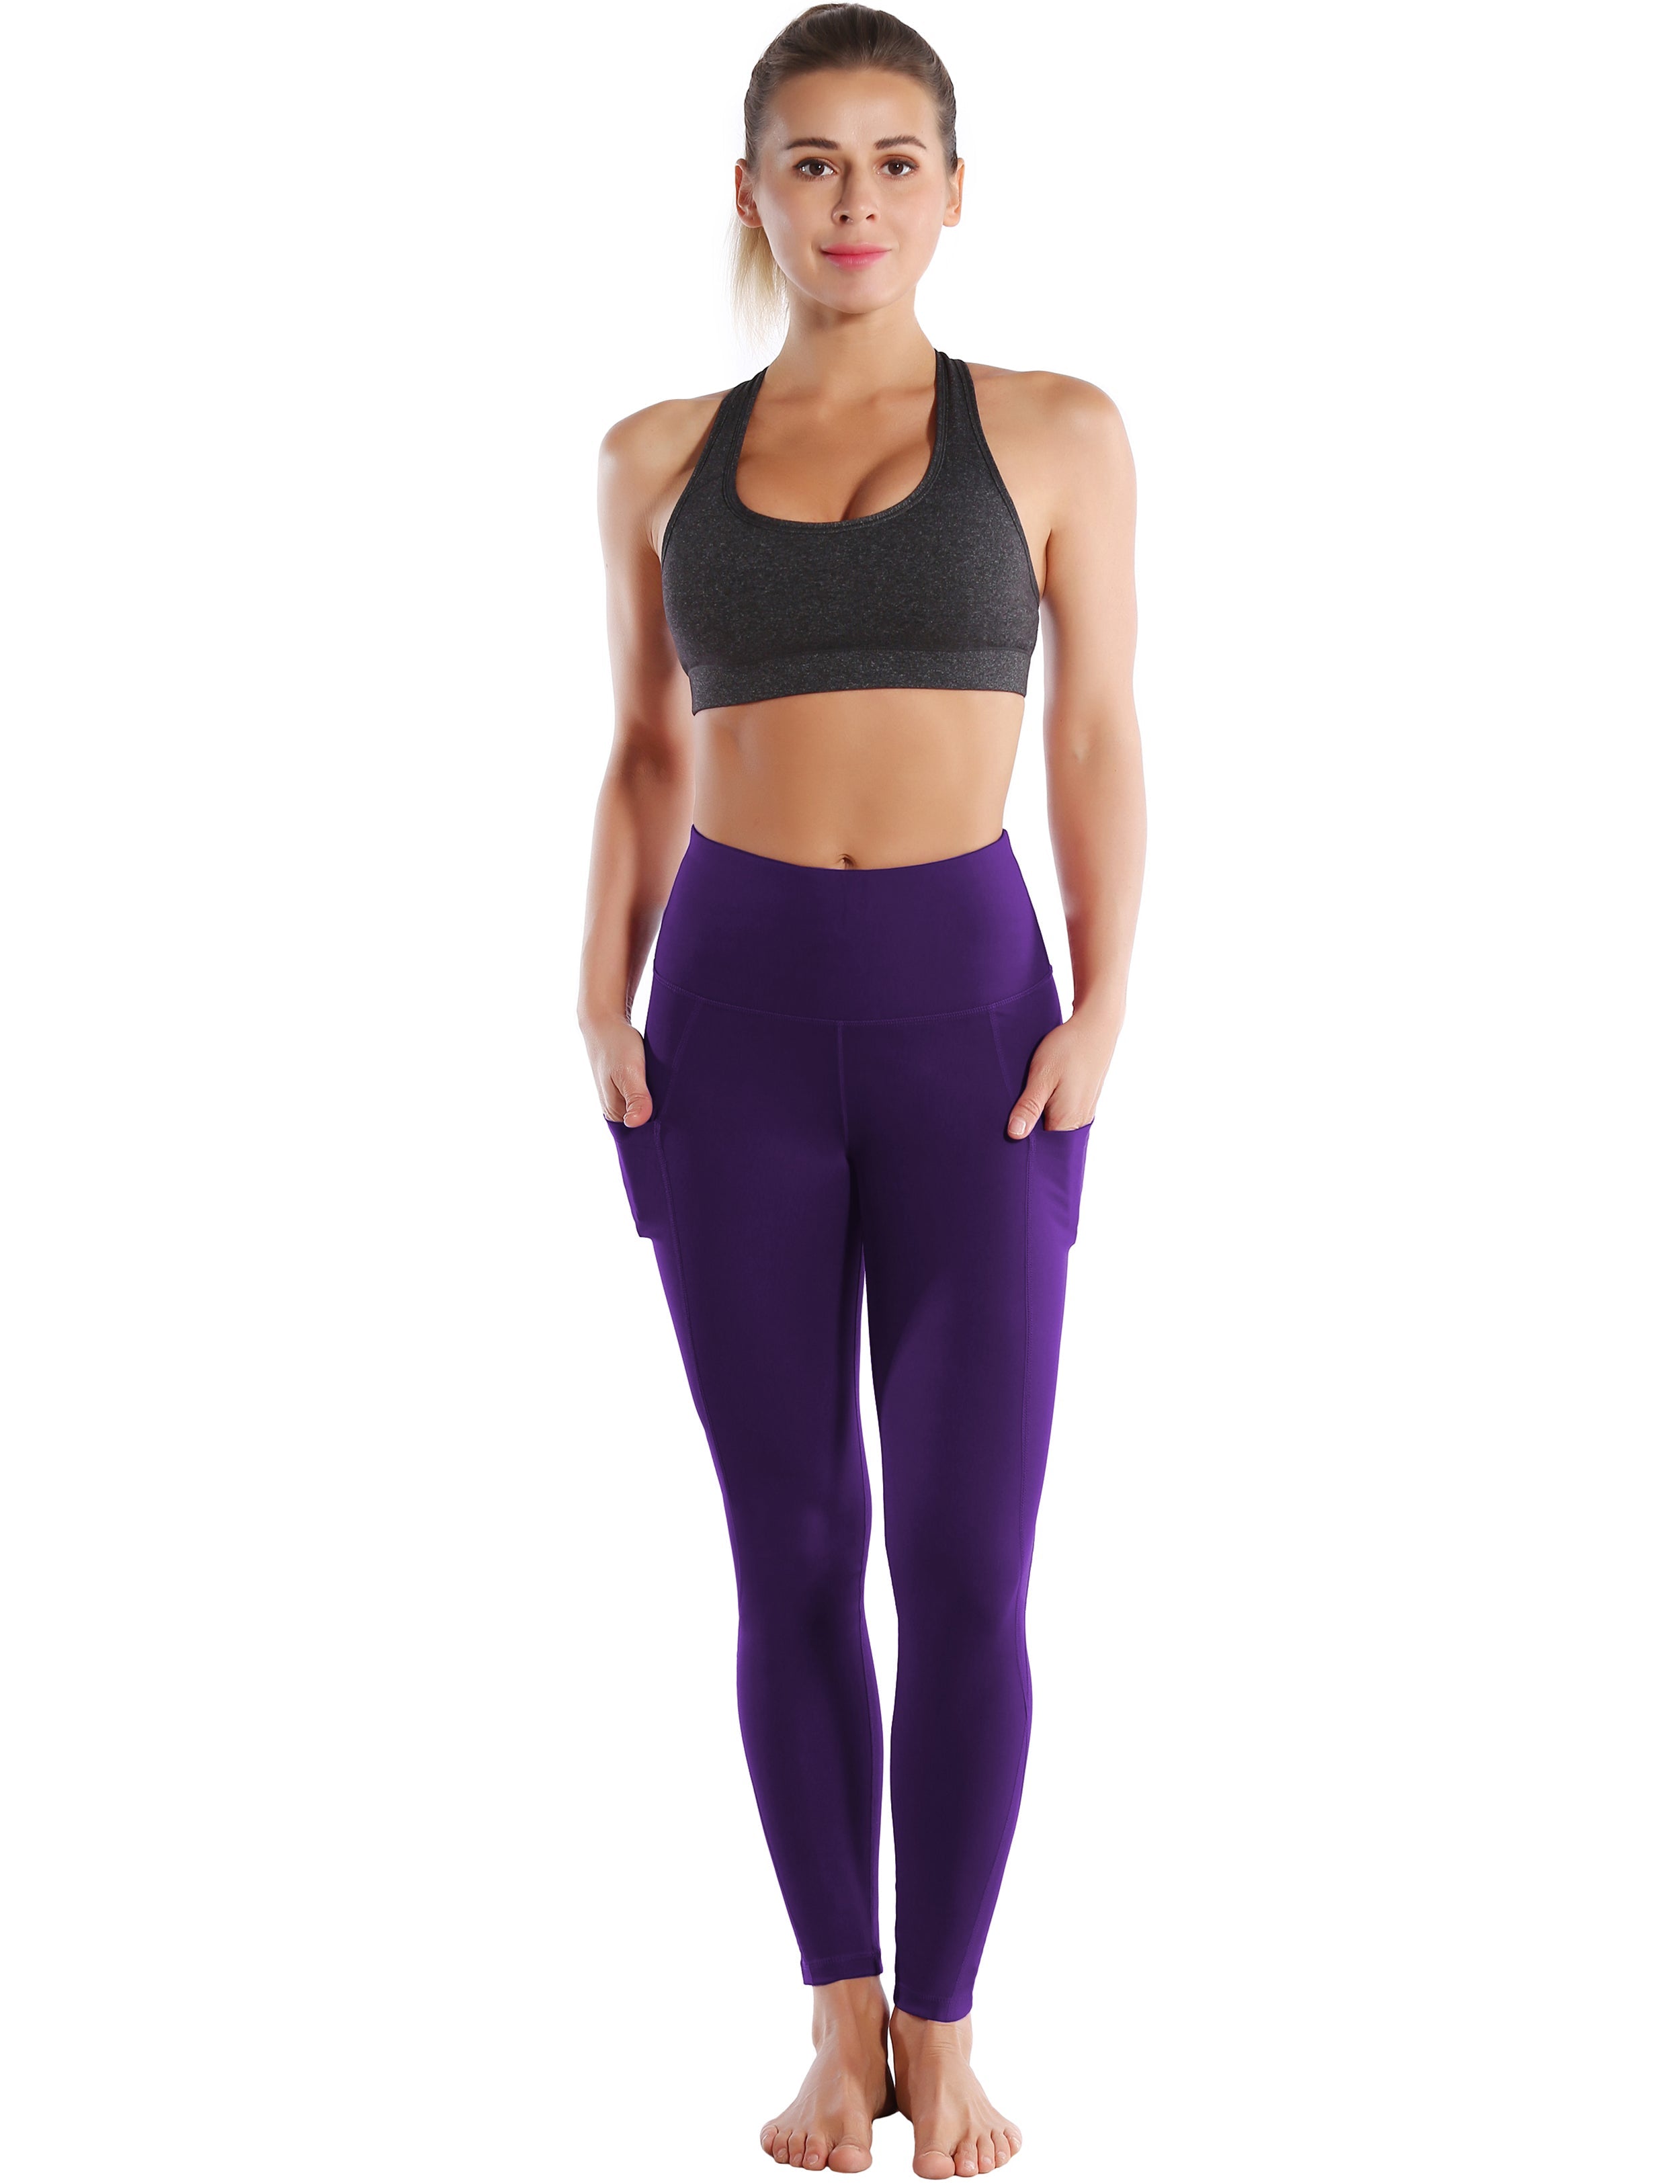 High Waist Side Pockets Biking Pants grapevine 75% Nylon, 25% Spandex Fabric doesn't attract lint easily 4-way stretch No see-through Moisture-wicking Tummy control Inner pocket